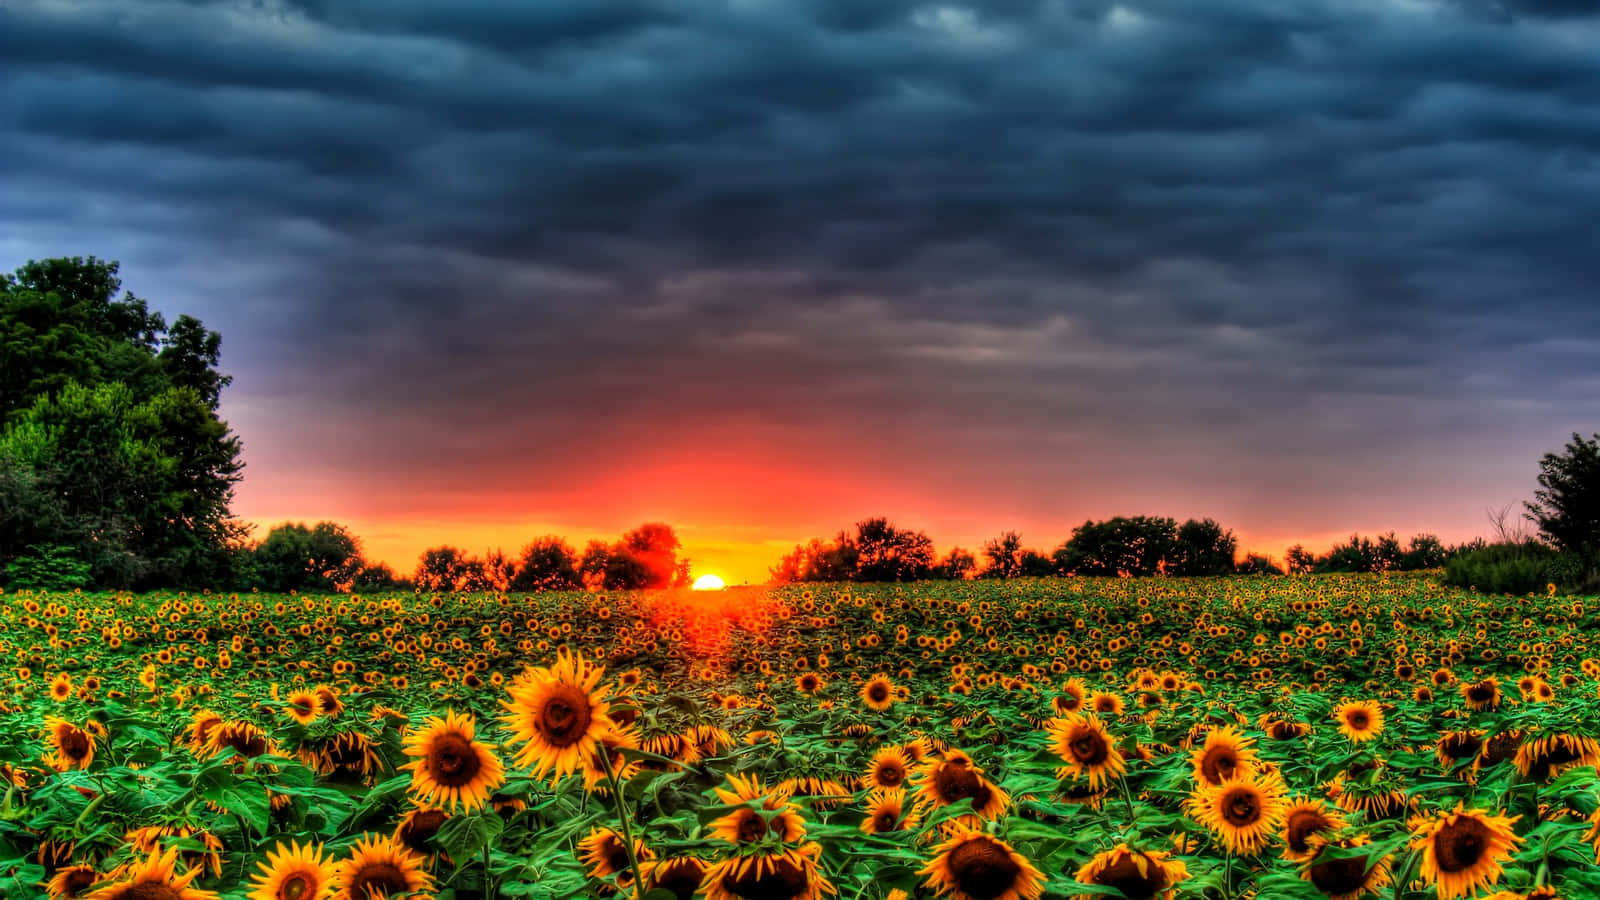 Bright and beautiful sunflowers in a sun-soaked field.